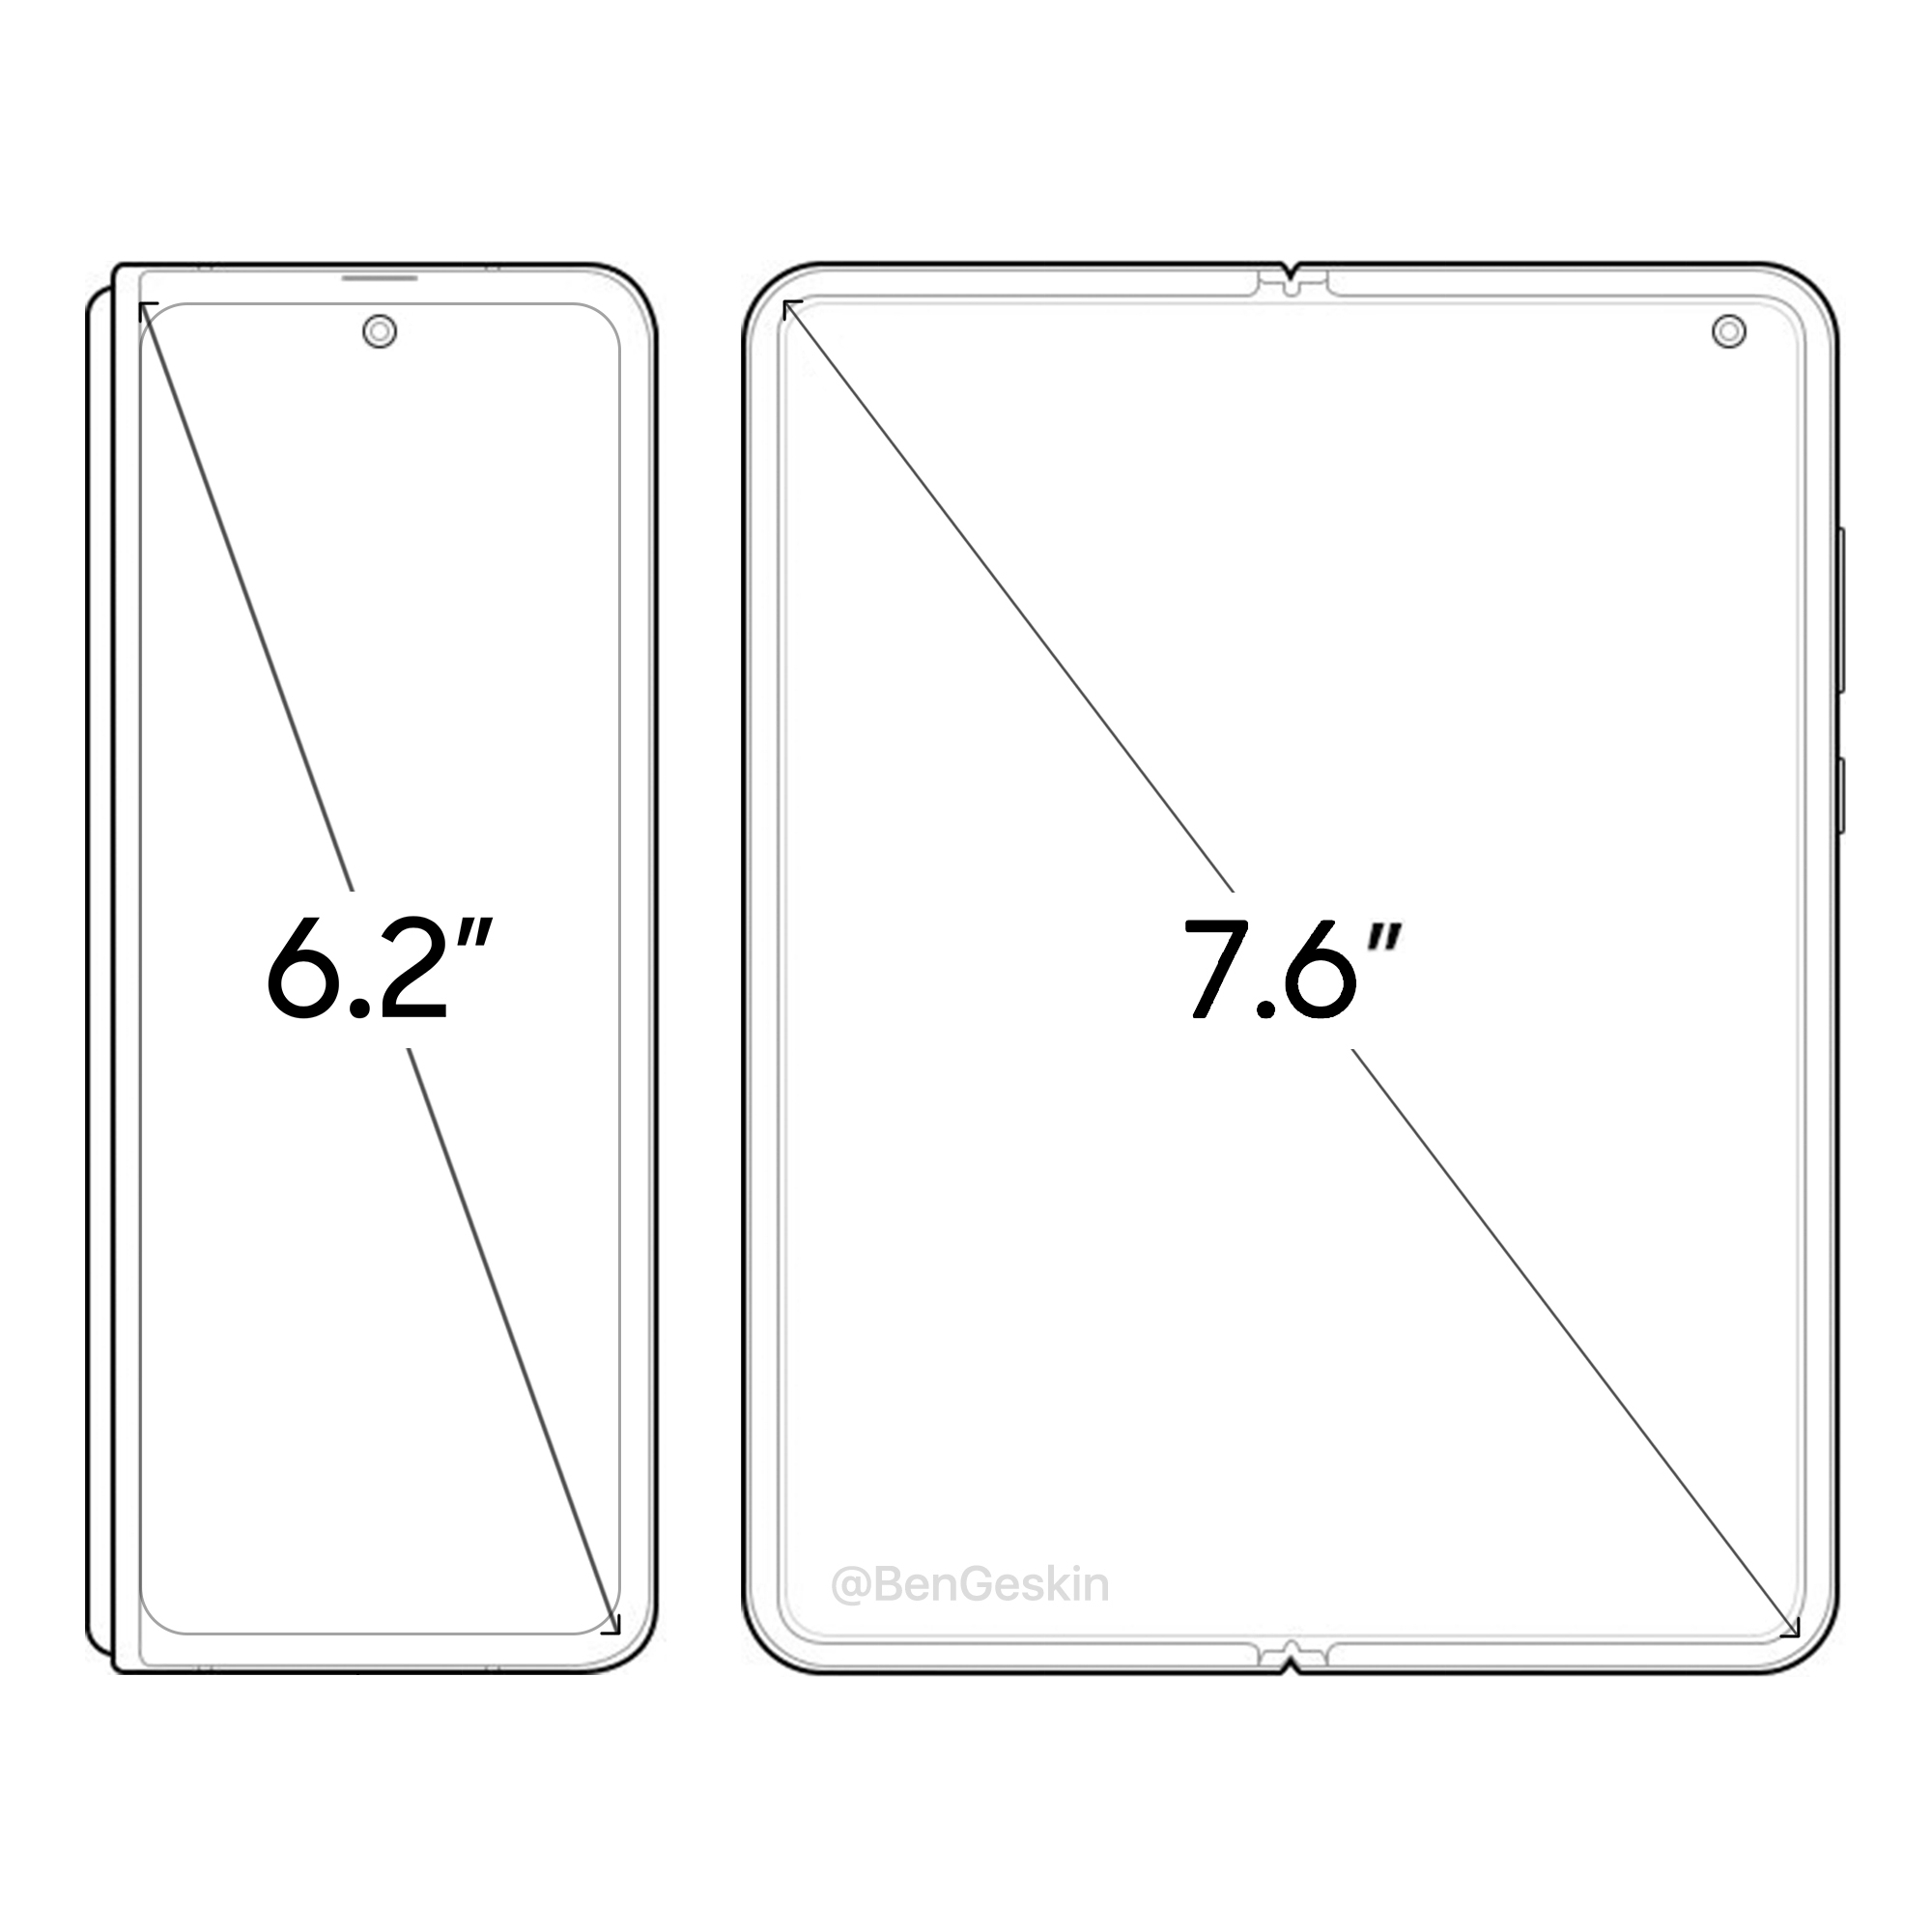 Samsung Galaxy Fold 2 expected to come with upgraded displays